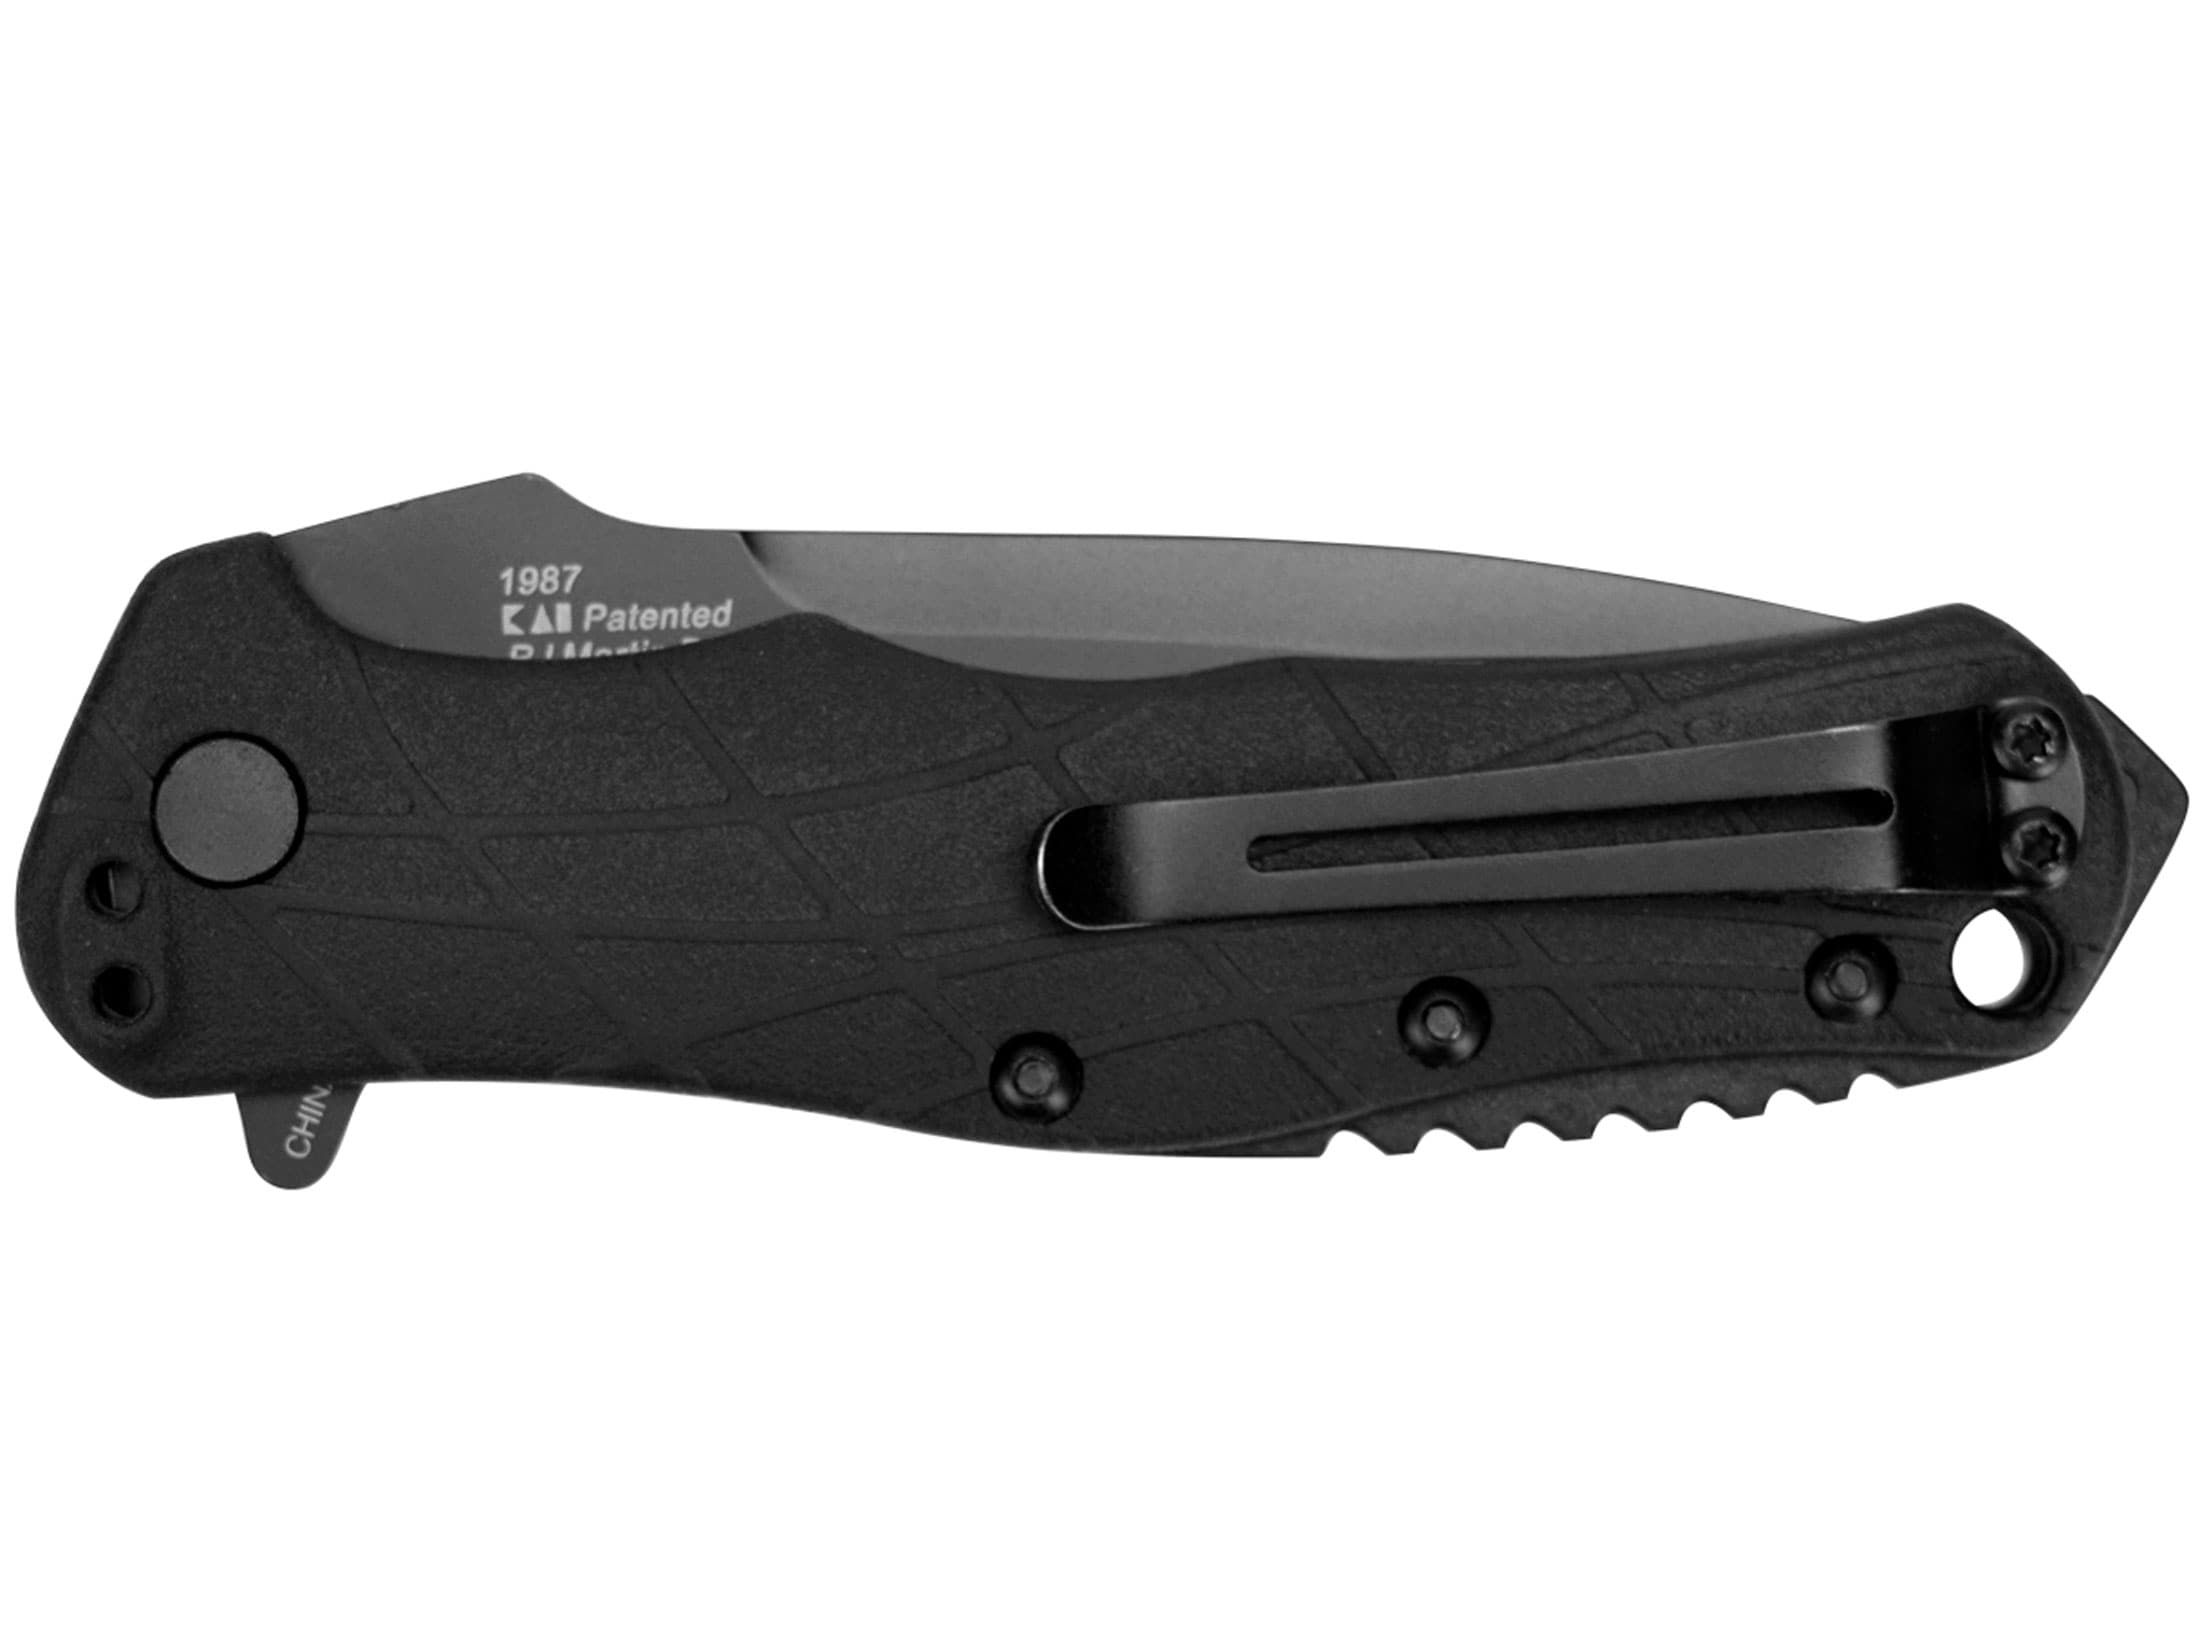 Kershaw RJ Tactical 3.0 Folding Assisted Opening Pocket Knife 3″ Drop Point 8Cr13MoV Steel Blade Nylon Handle Black For Sale